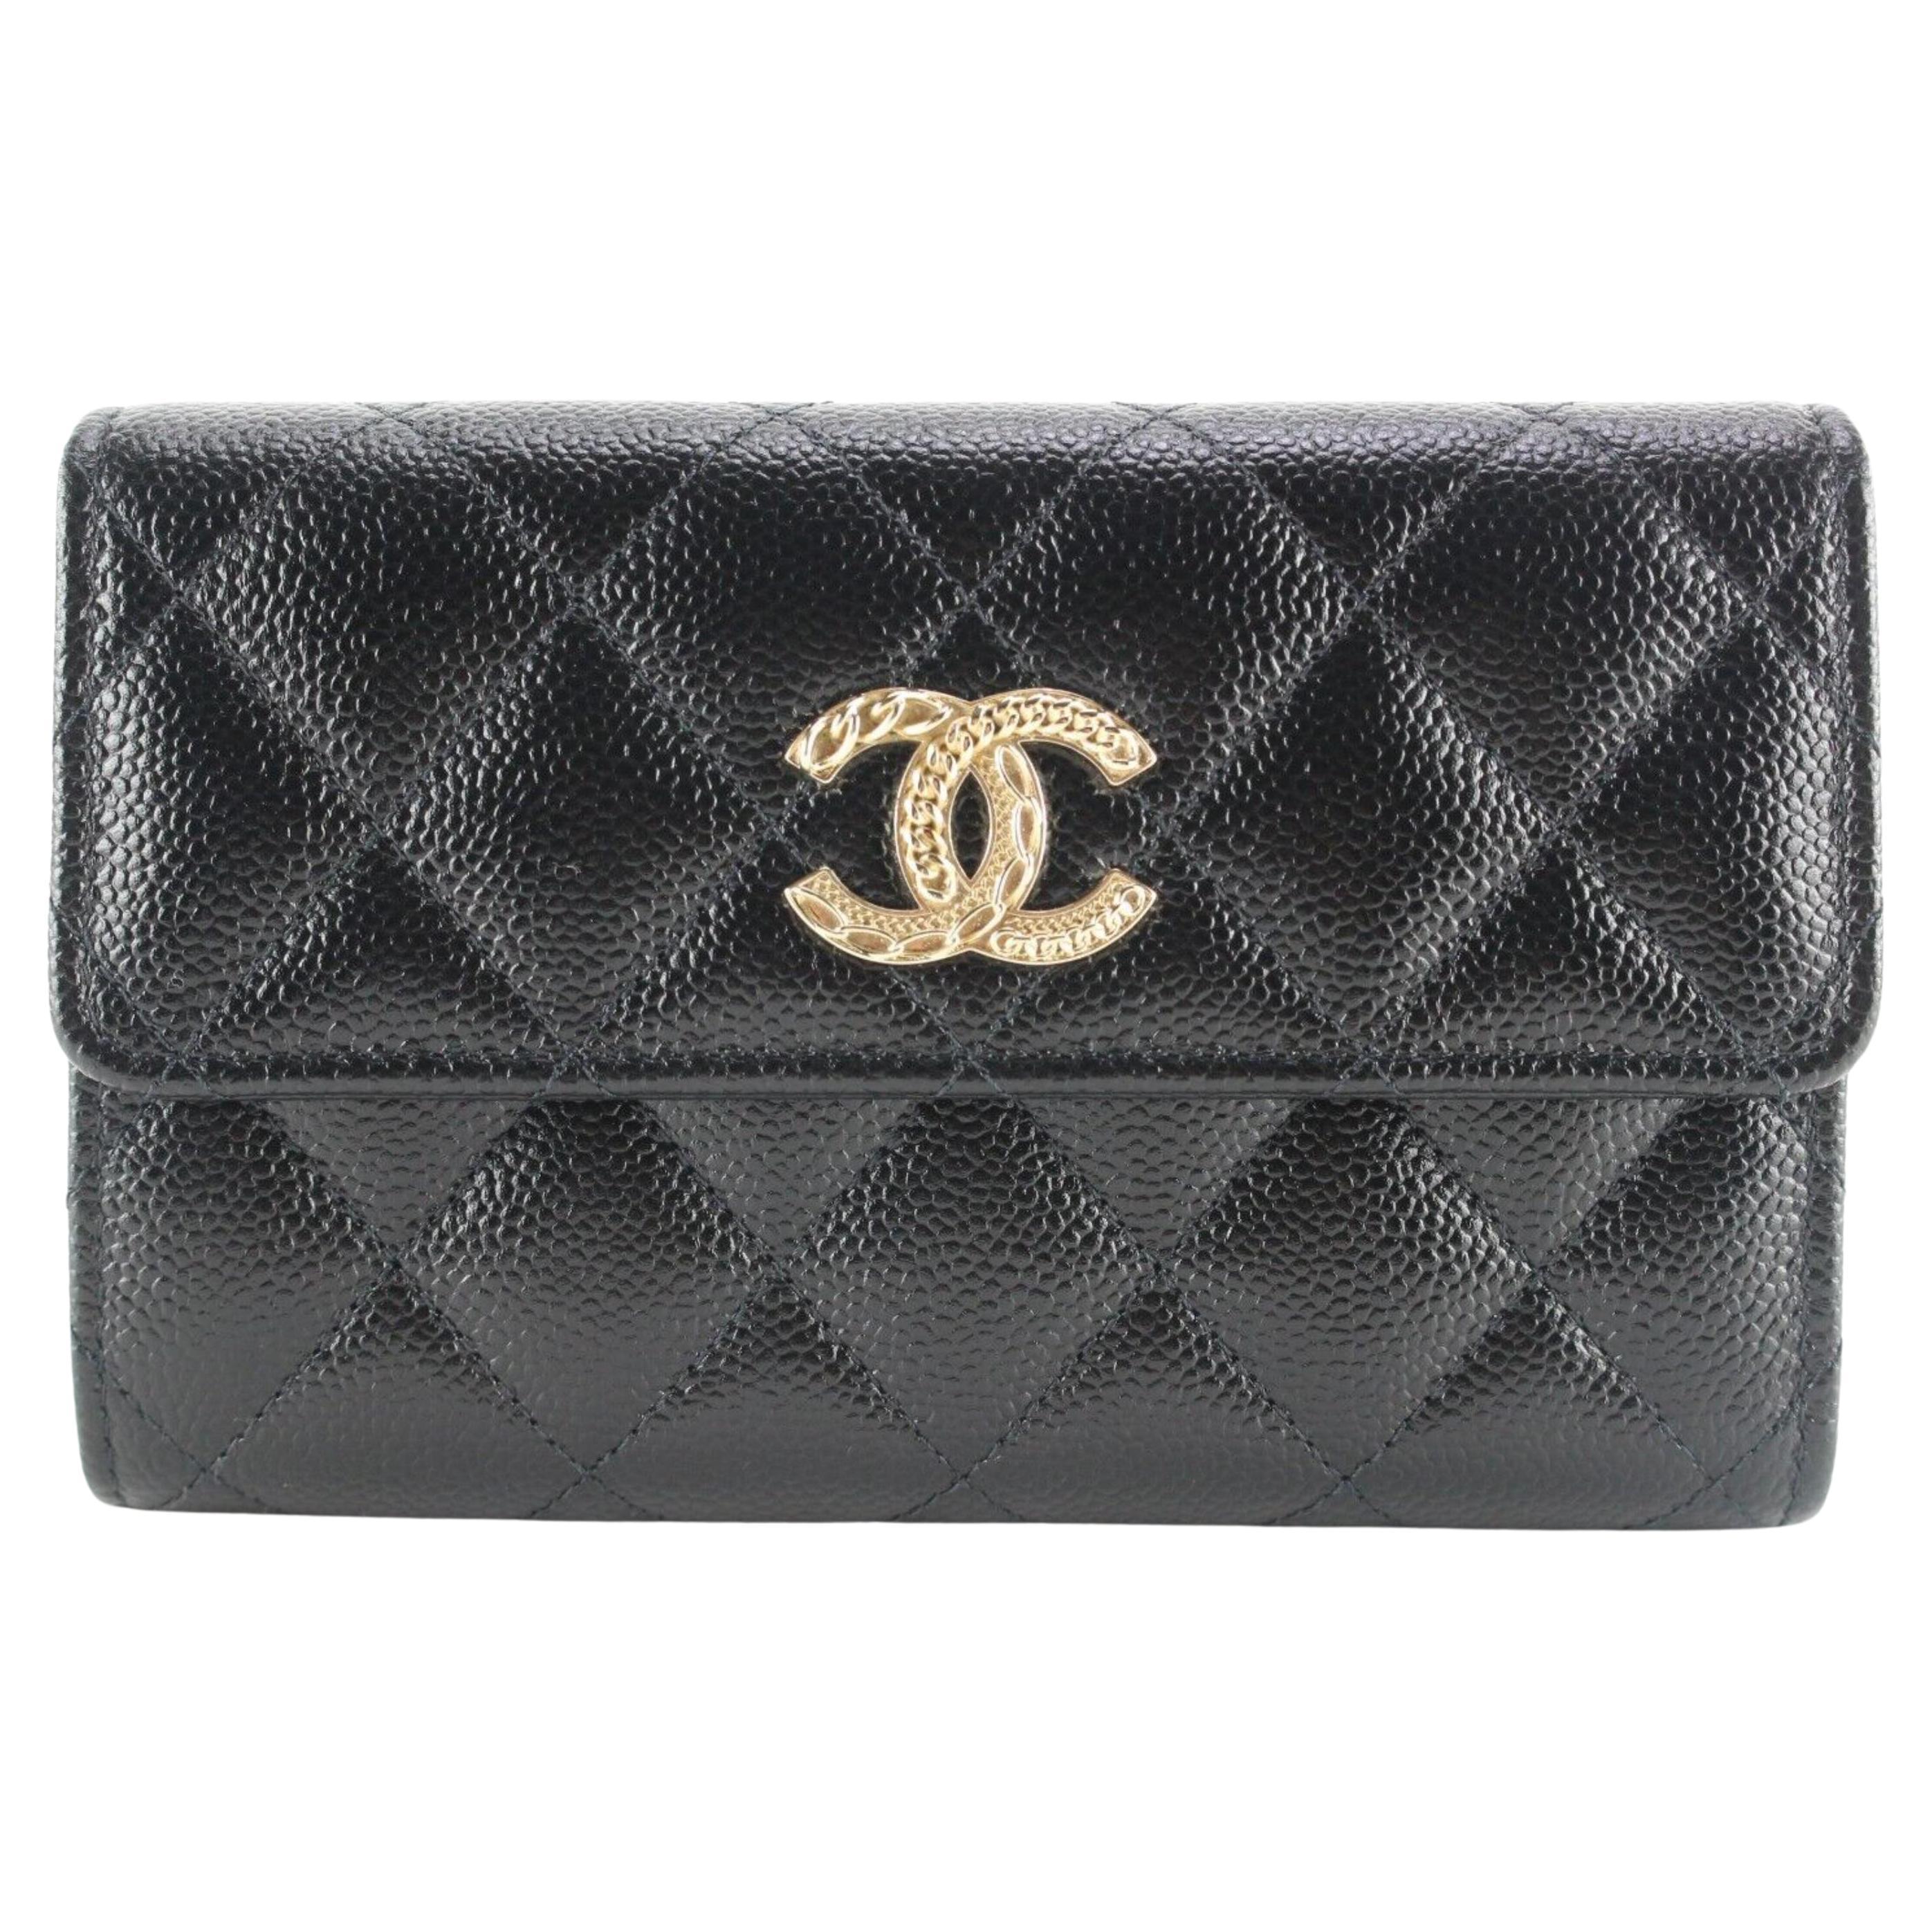 Chanel Black Quilted Caviar Leather Flap Wallet GHW 6CK0215